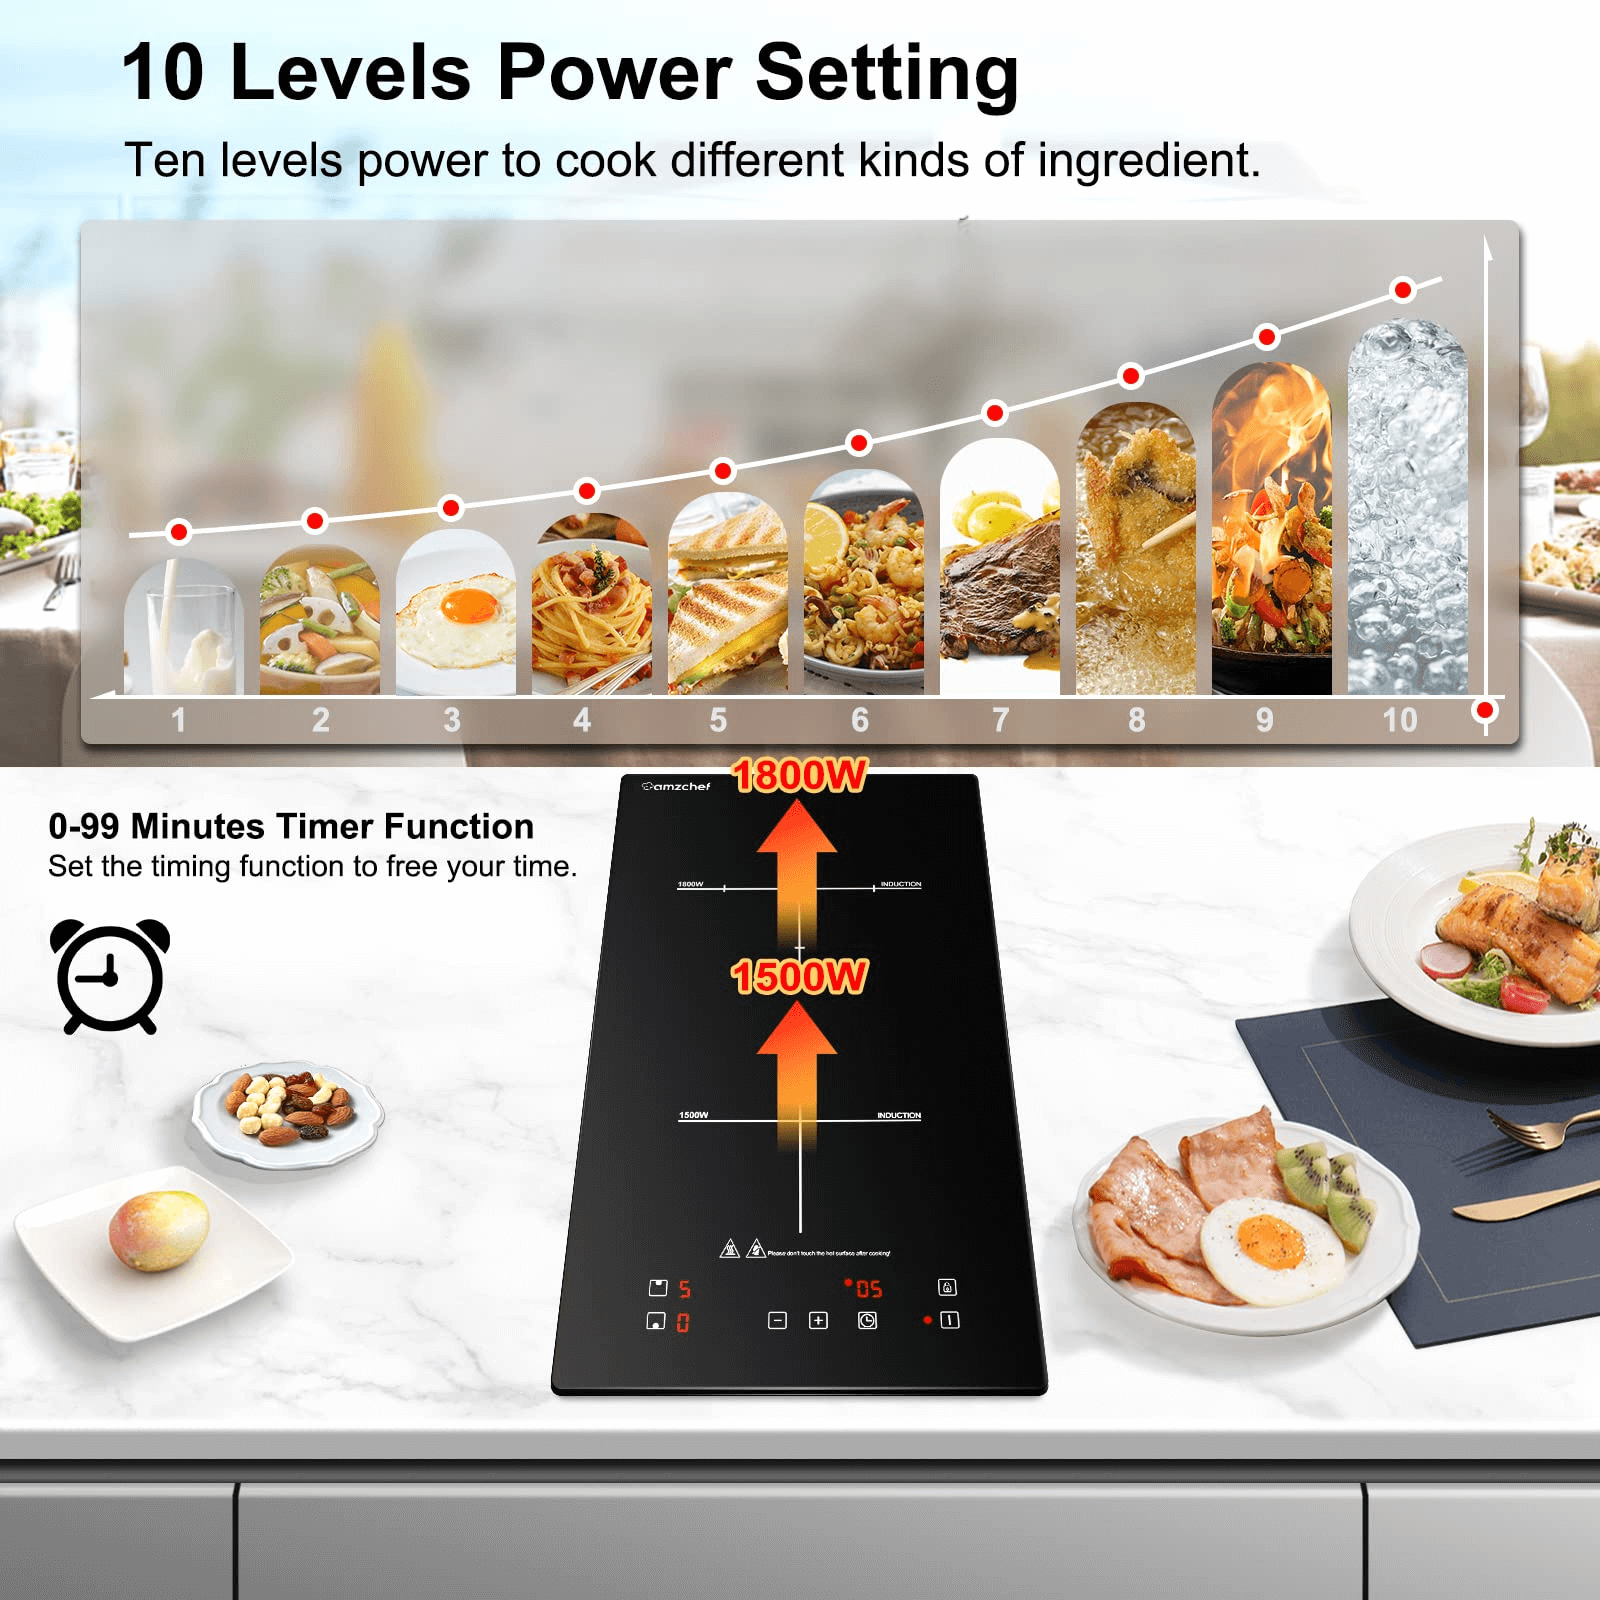 AMZCHEF Electric Induction Cooktop 12